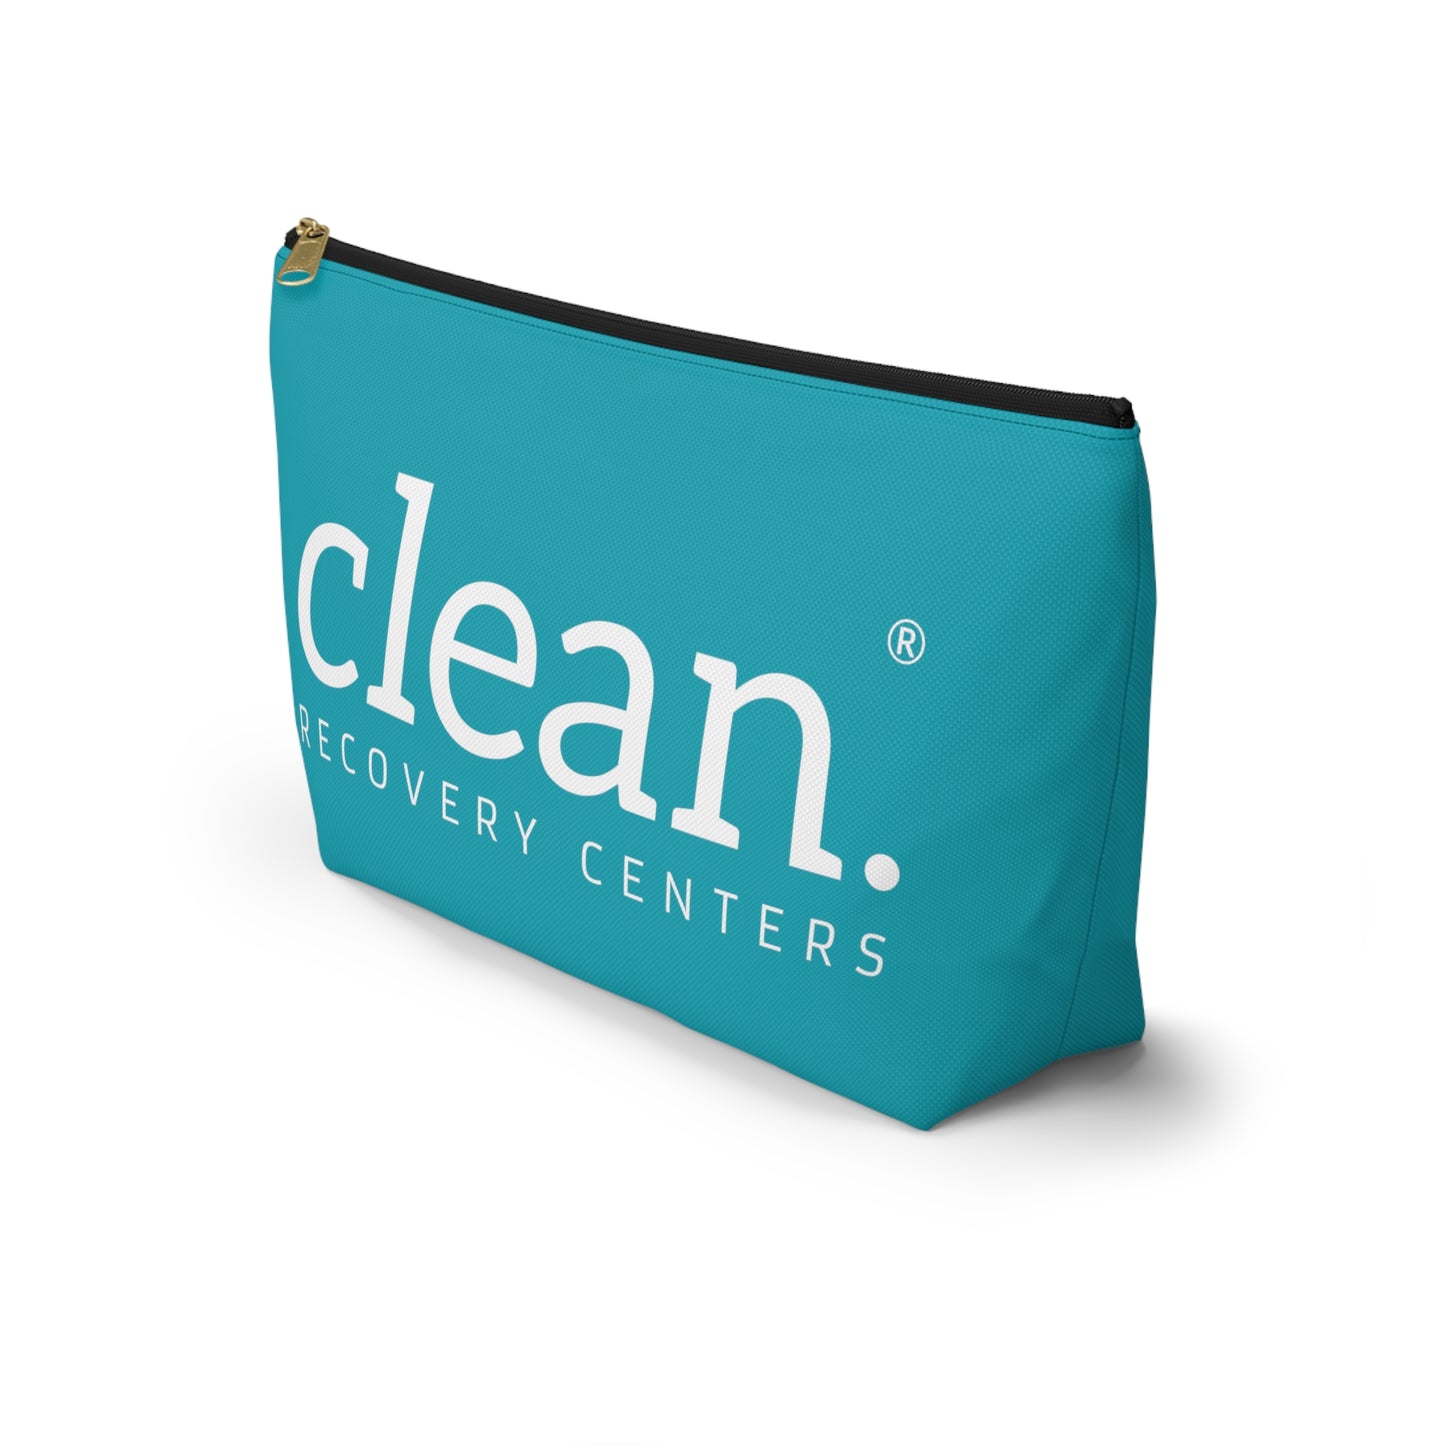 Clean Logo Accessory Pouch